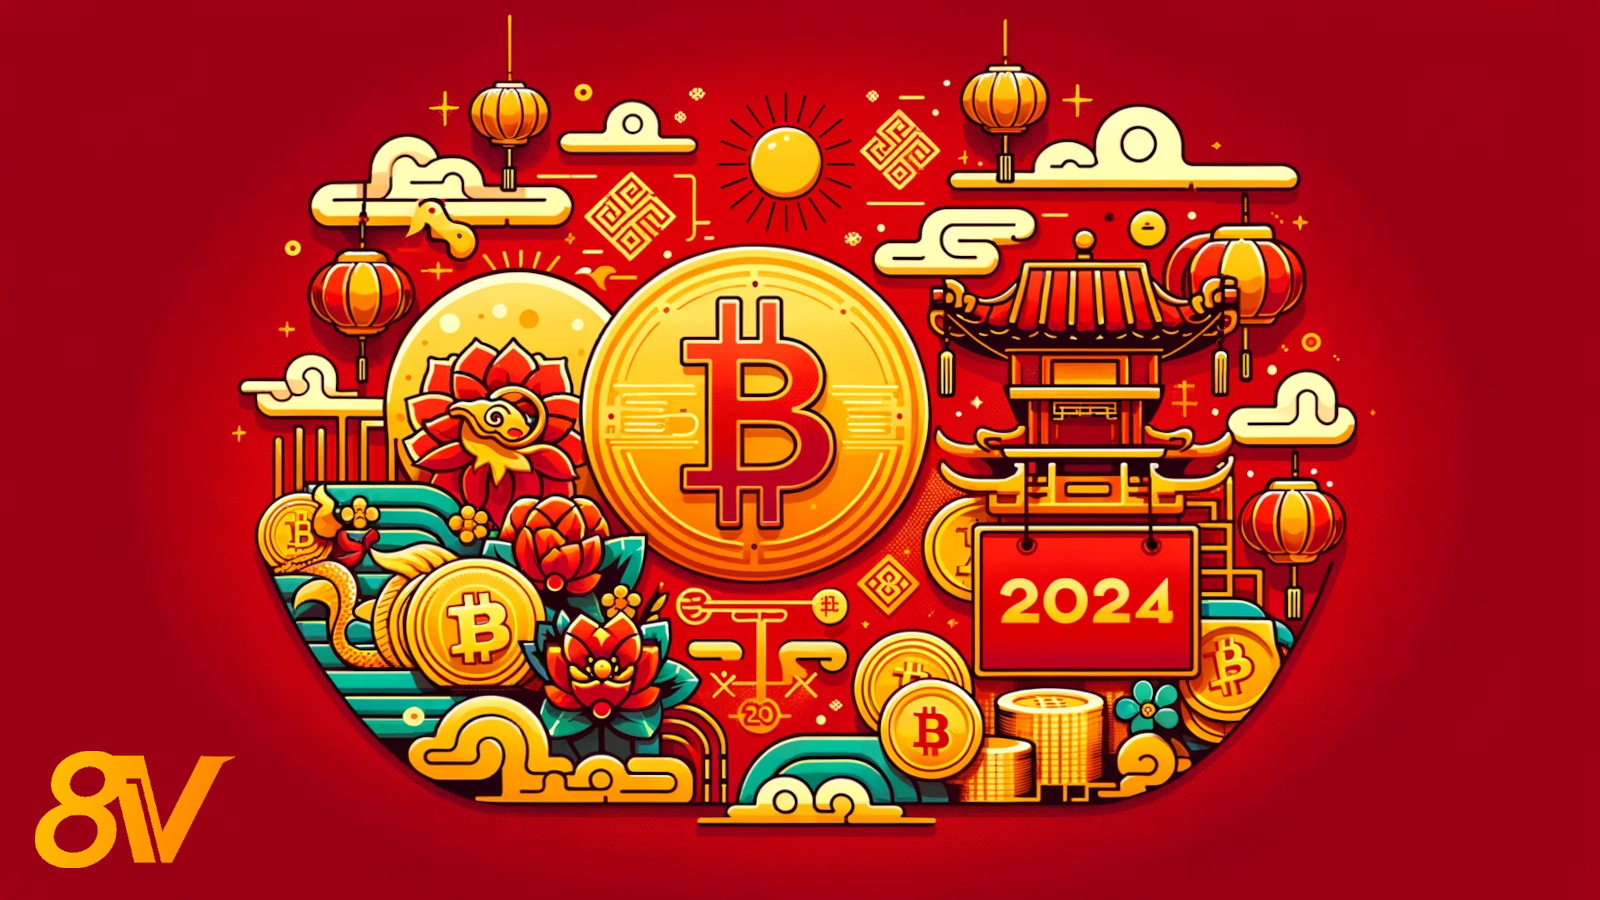 8V exchange welcomes 2024 and the bitcoin ETF title image